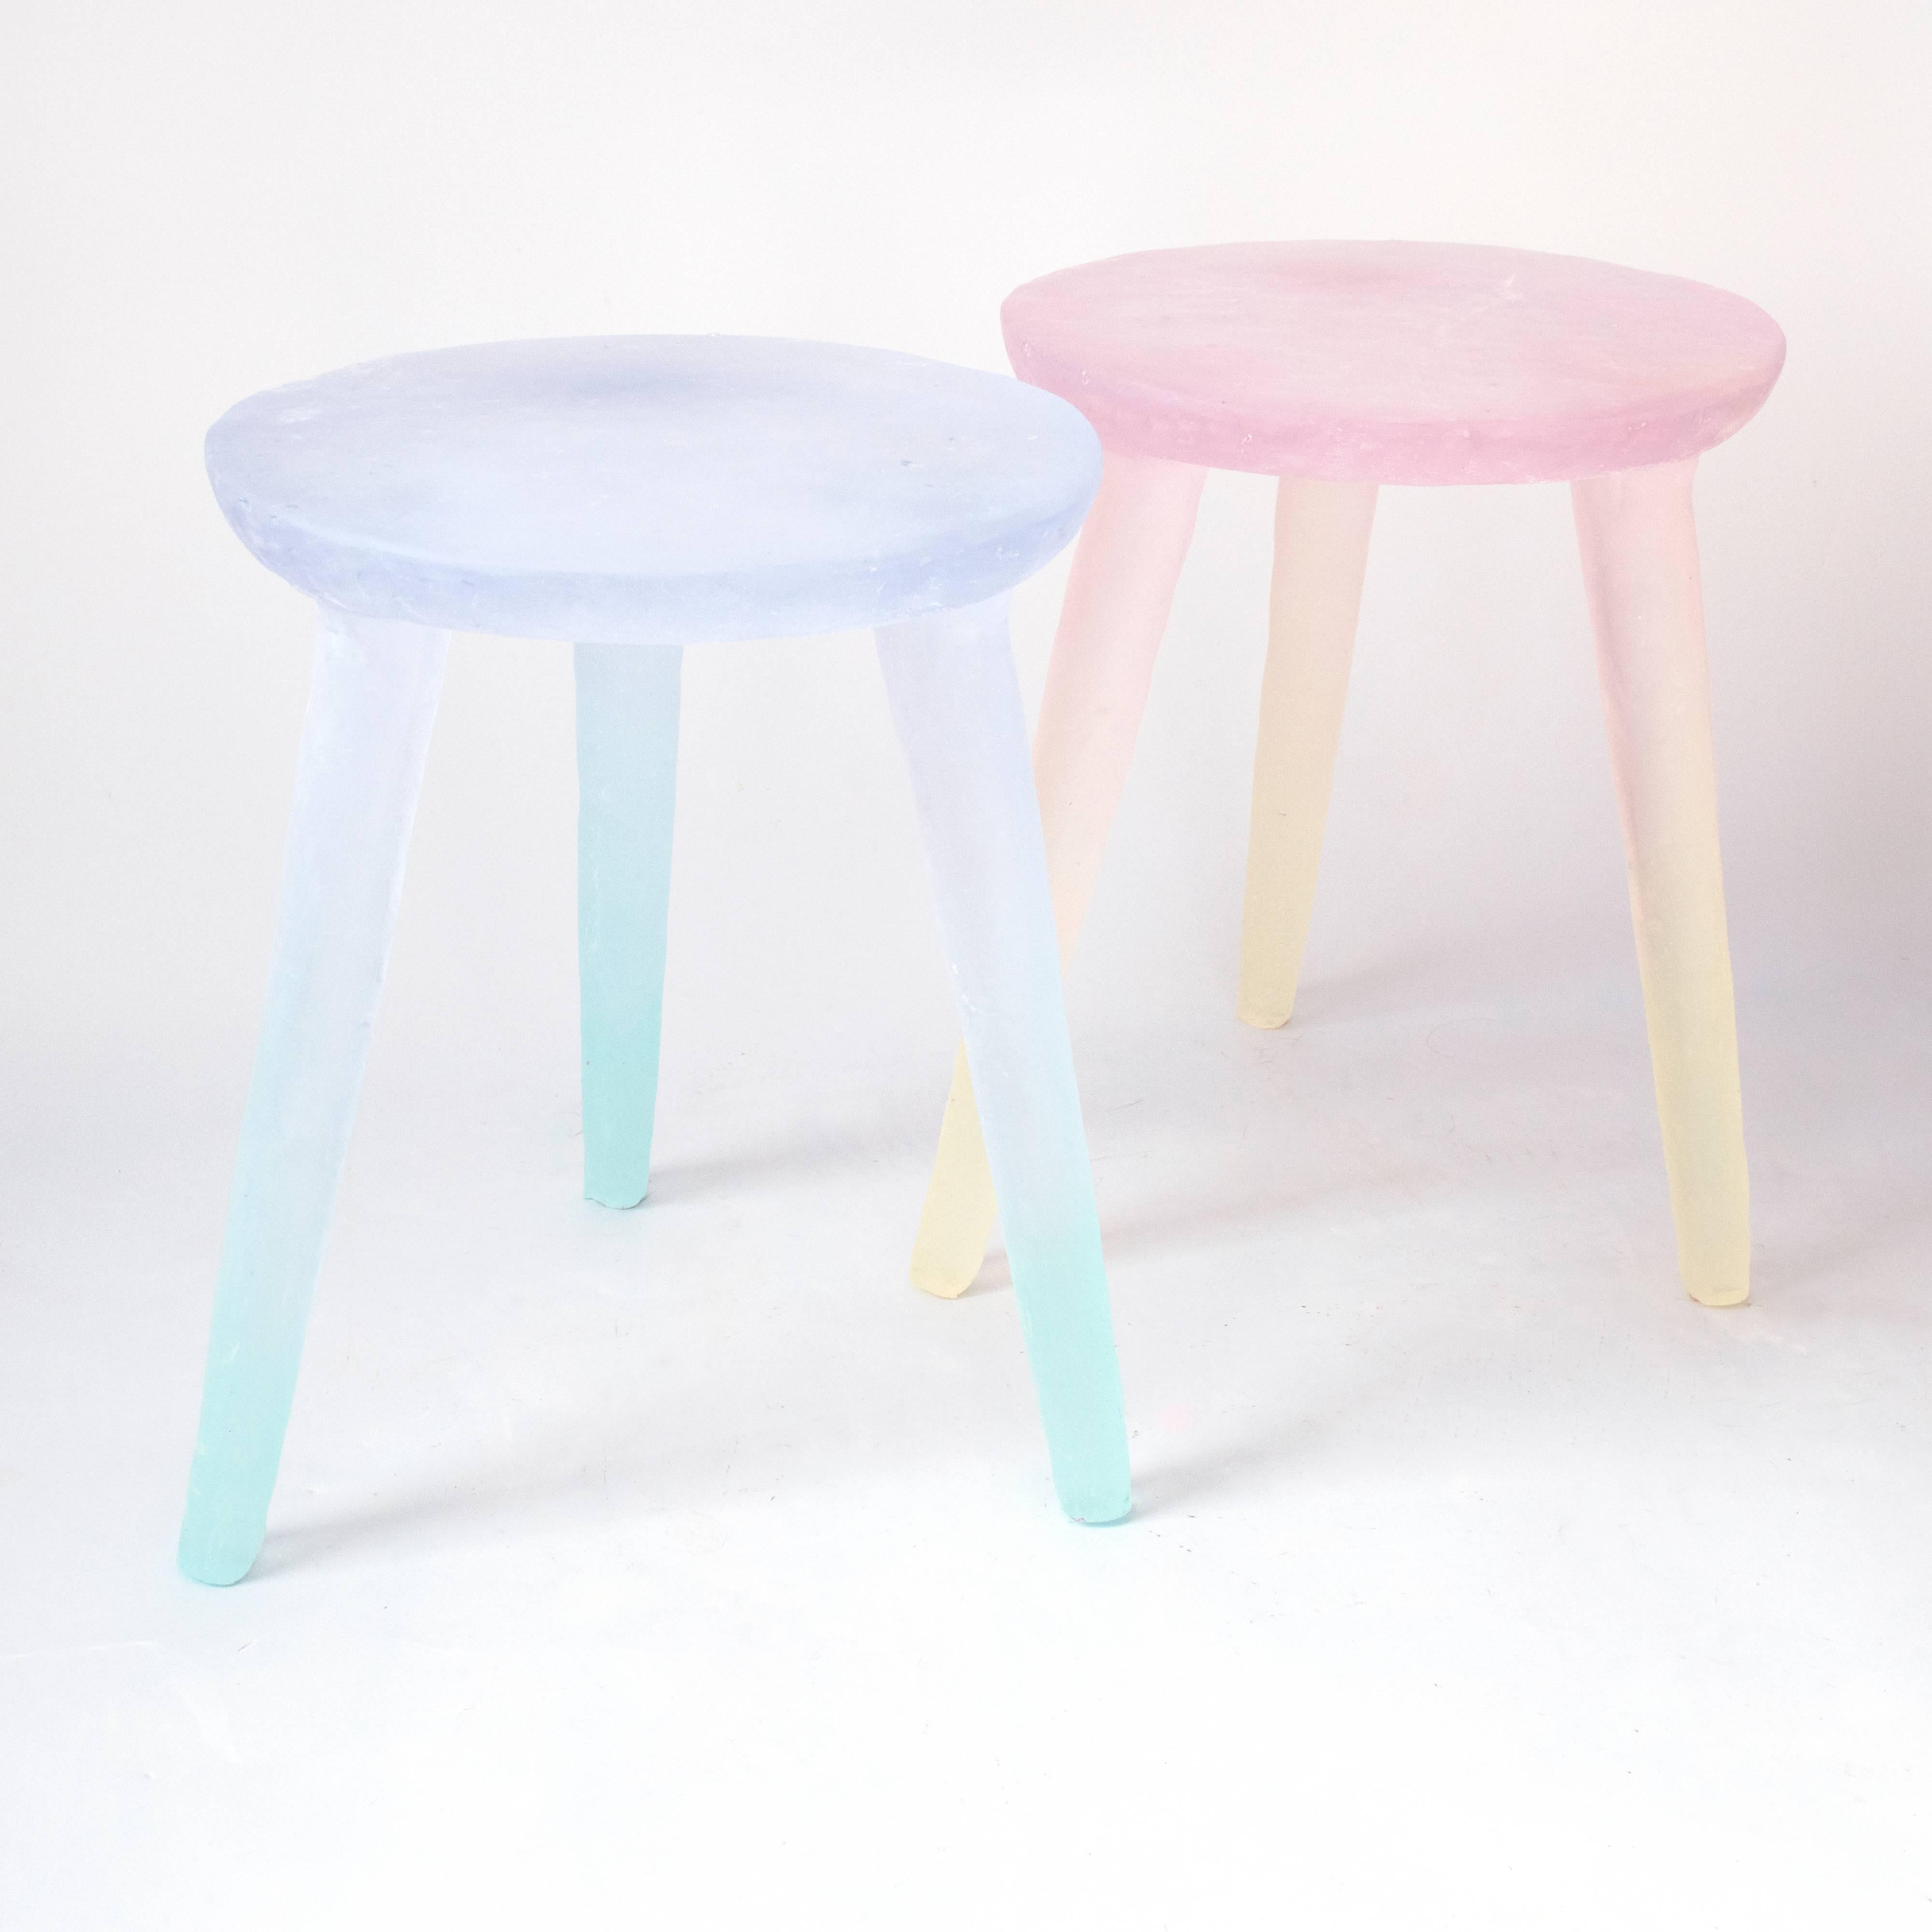 Glow Side Table or Stool in Pink to Yellow, Handmade from Recycled Resin For Sale 1